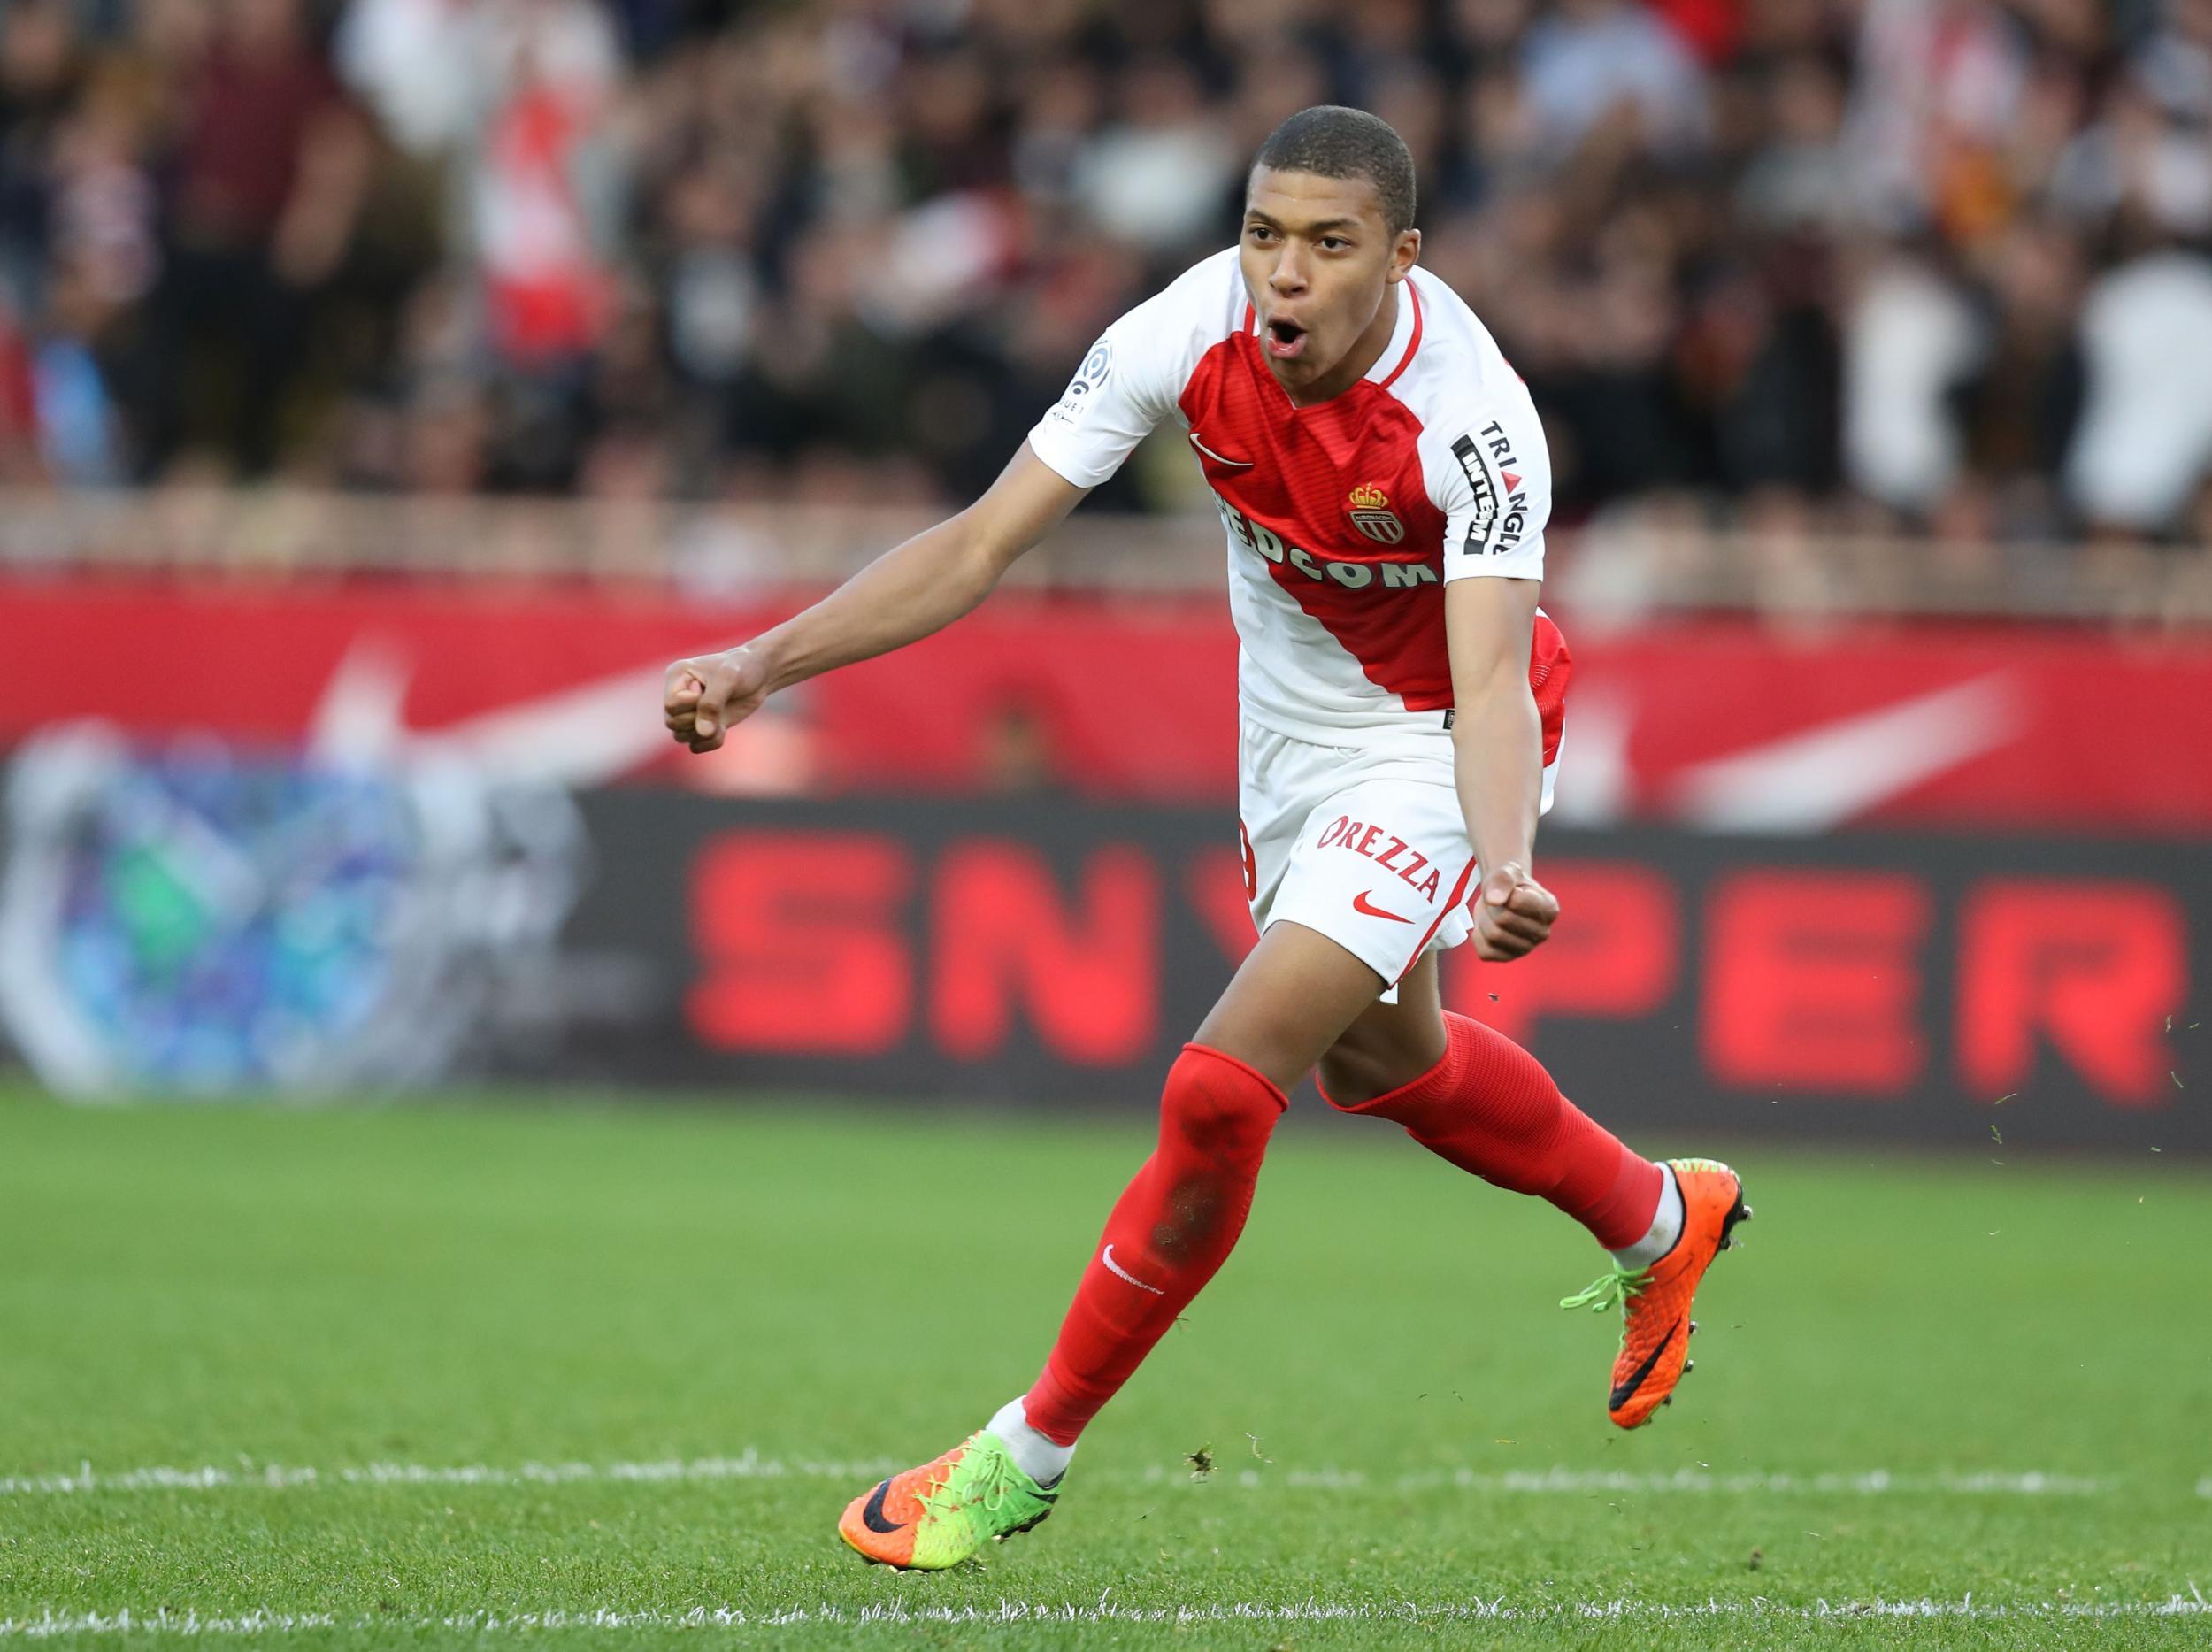 Mbappe could end speculation over a move by signing a new deal this summer